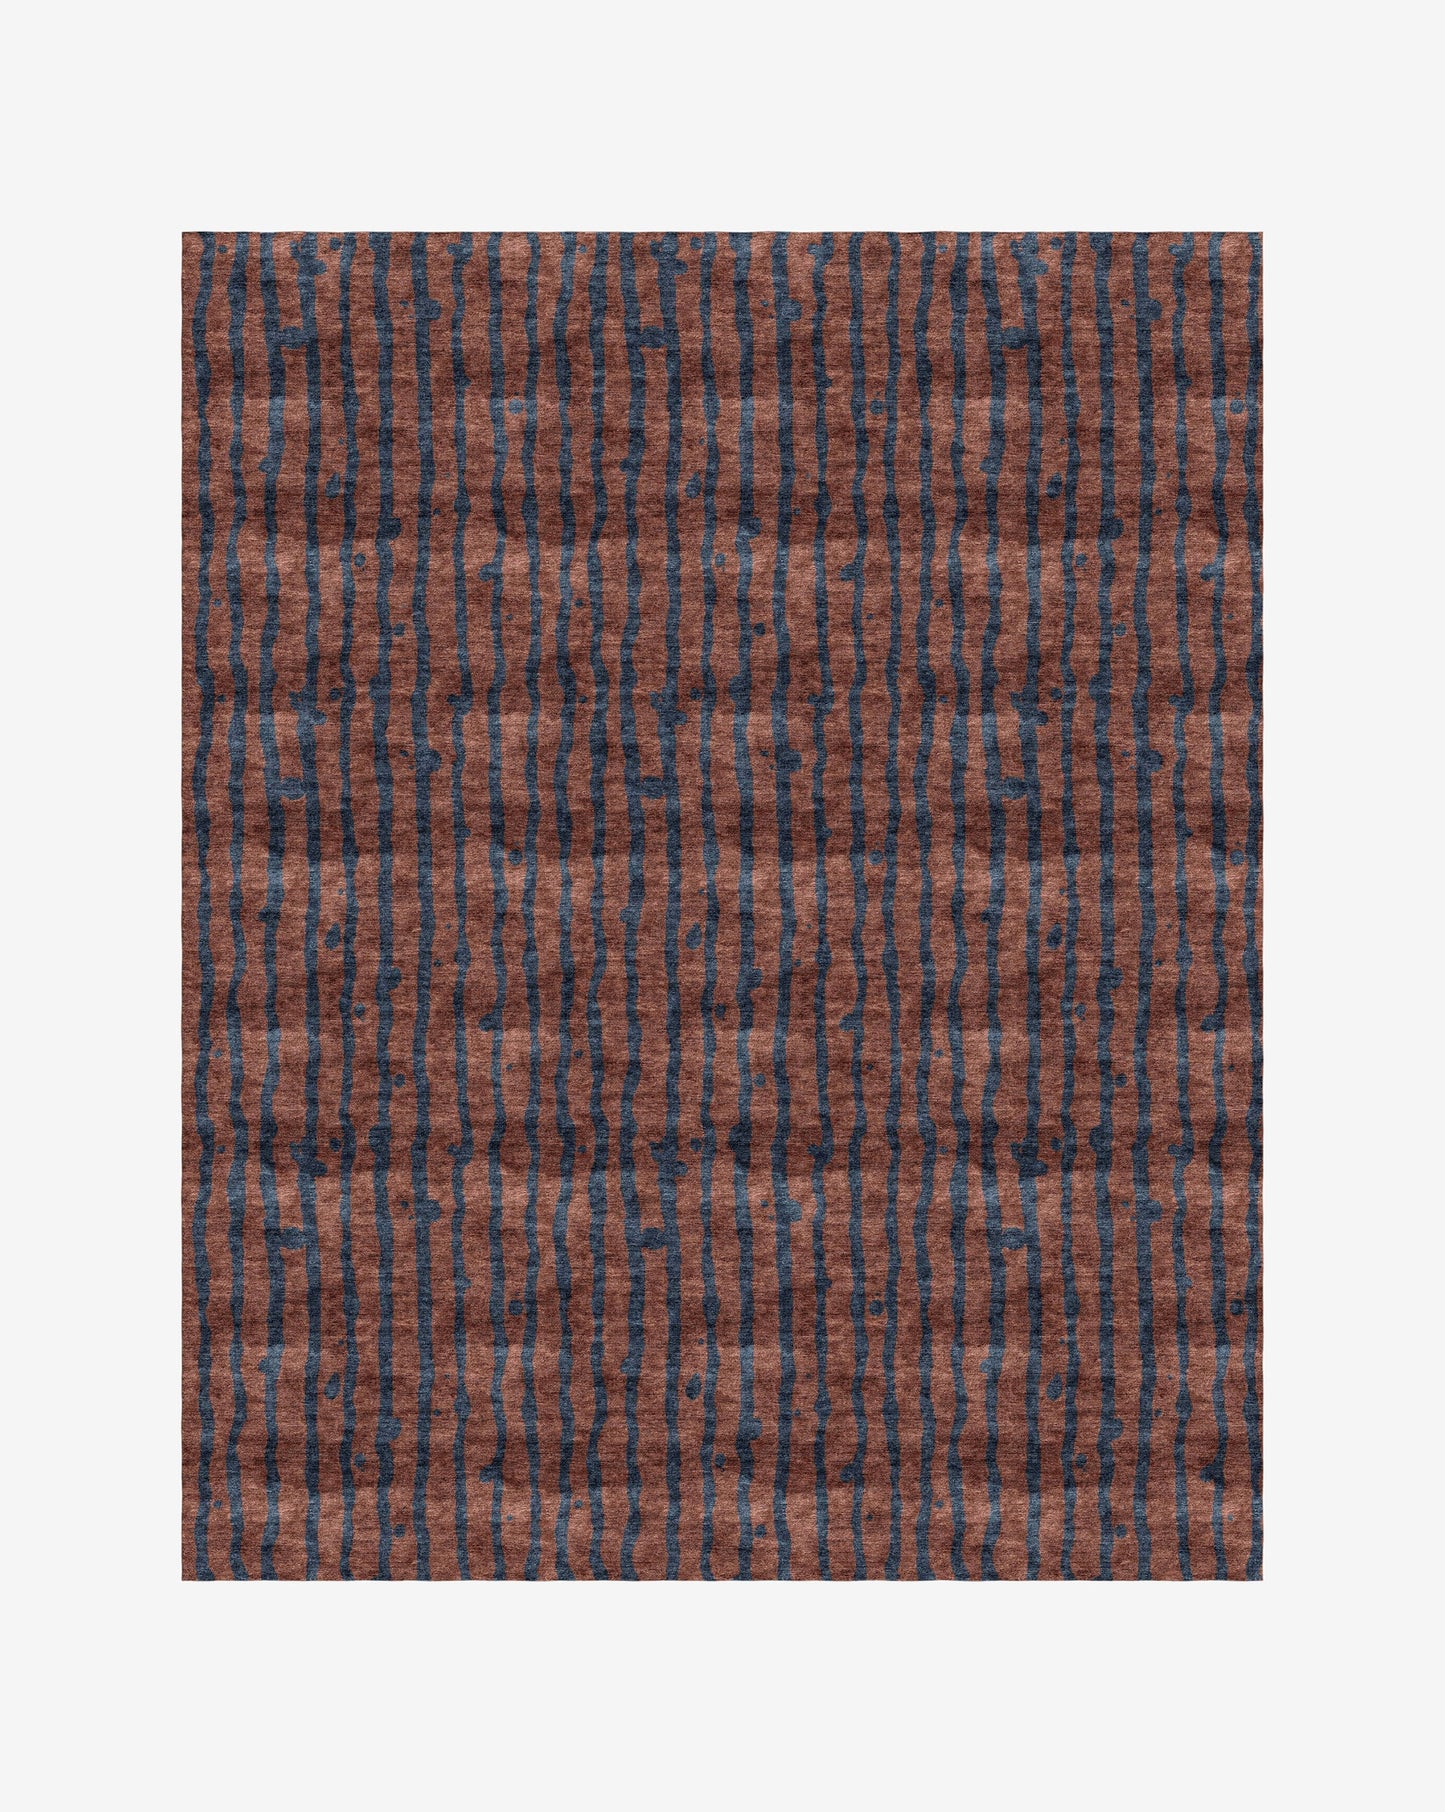 A Drippy Stripe Hand Knotted Rug Isthmus with a bold blue pattern